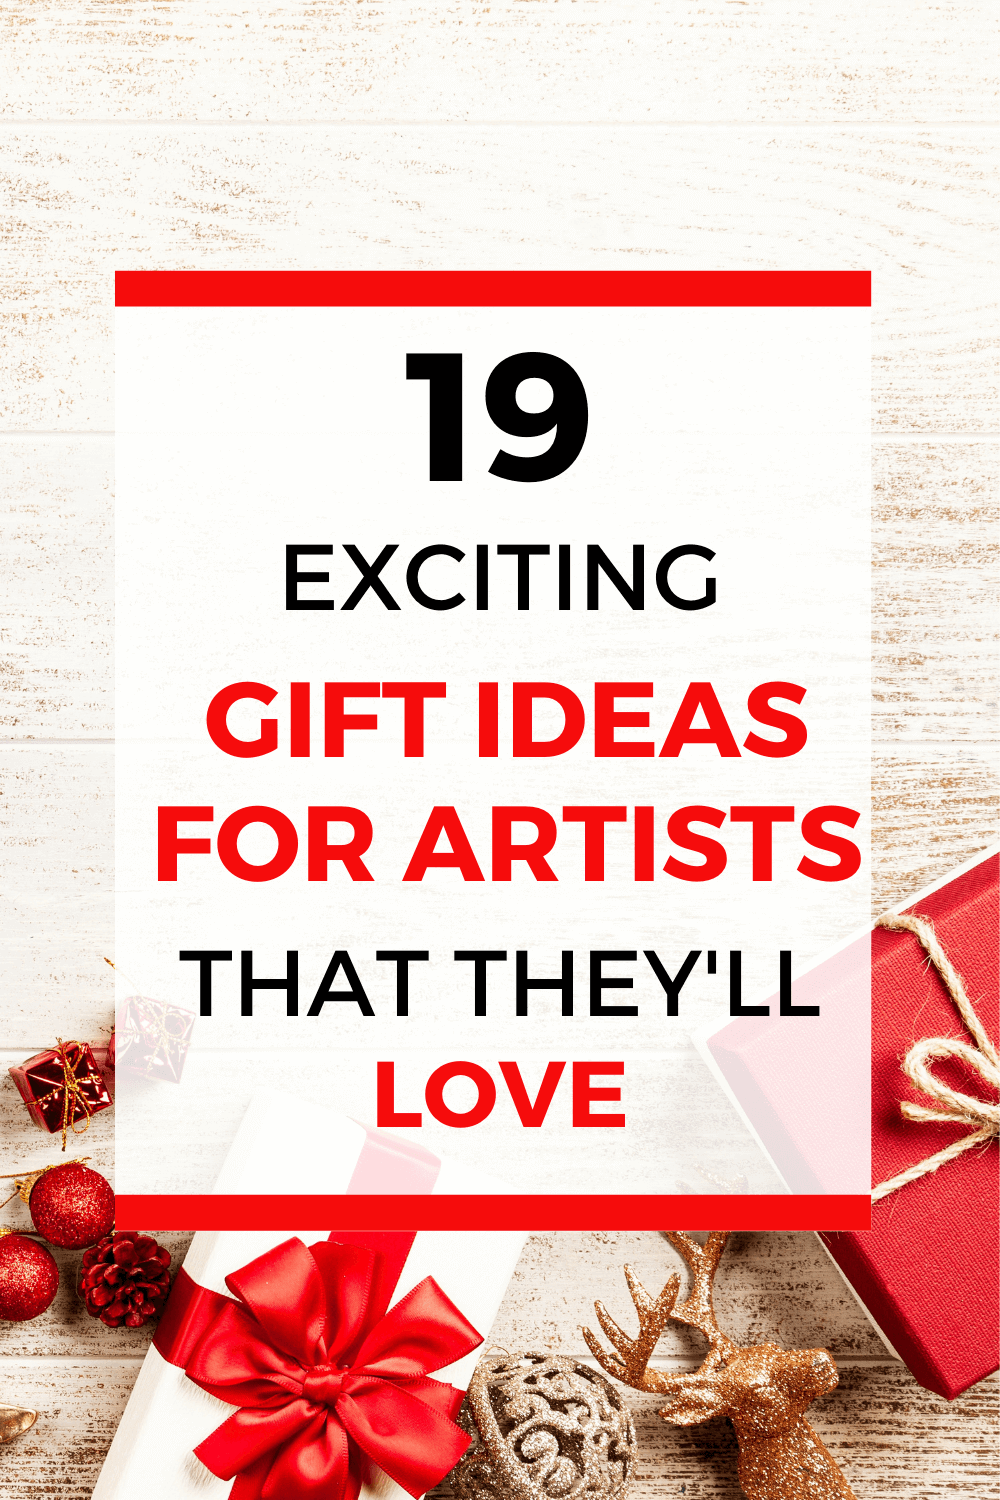 Click here to get 19 exciting Christmas gift ideas for artists! Use this gift guide to learn about the best art supplies that you can give to your artist friends, including painting, drawing, and inking supplies. These creative ideas are sure to make great gifts for artistic kids, teens, and adults. Make sure you get your hands on these unique gifts for creative people.